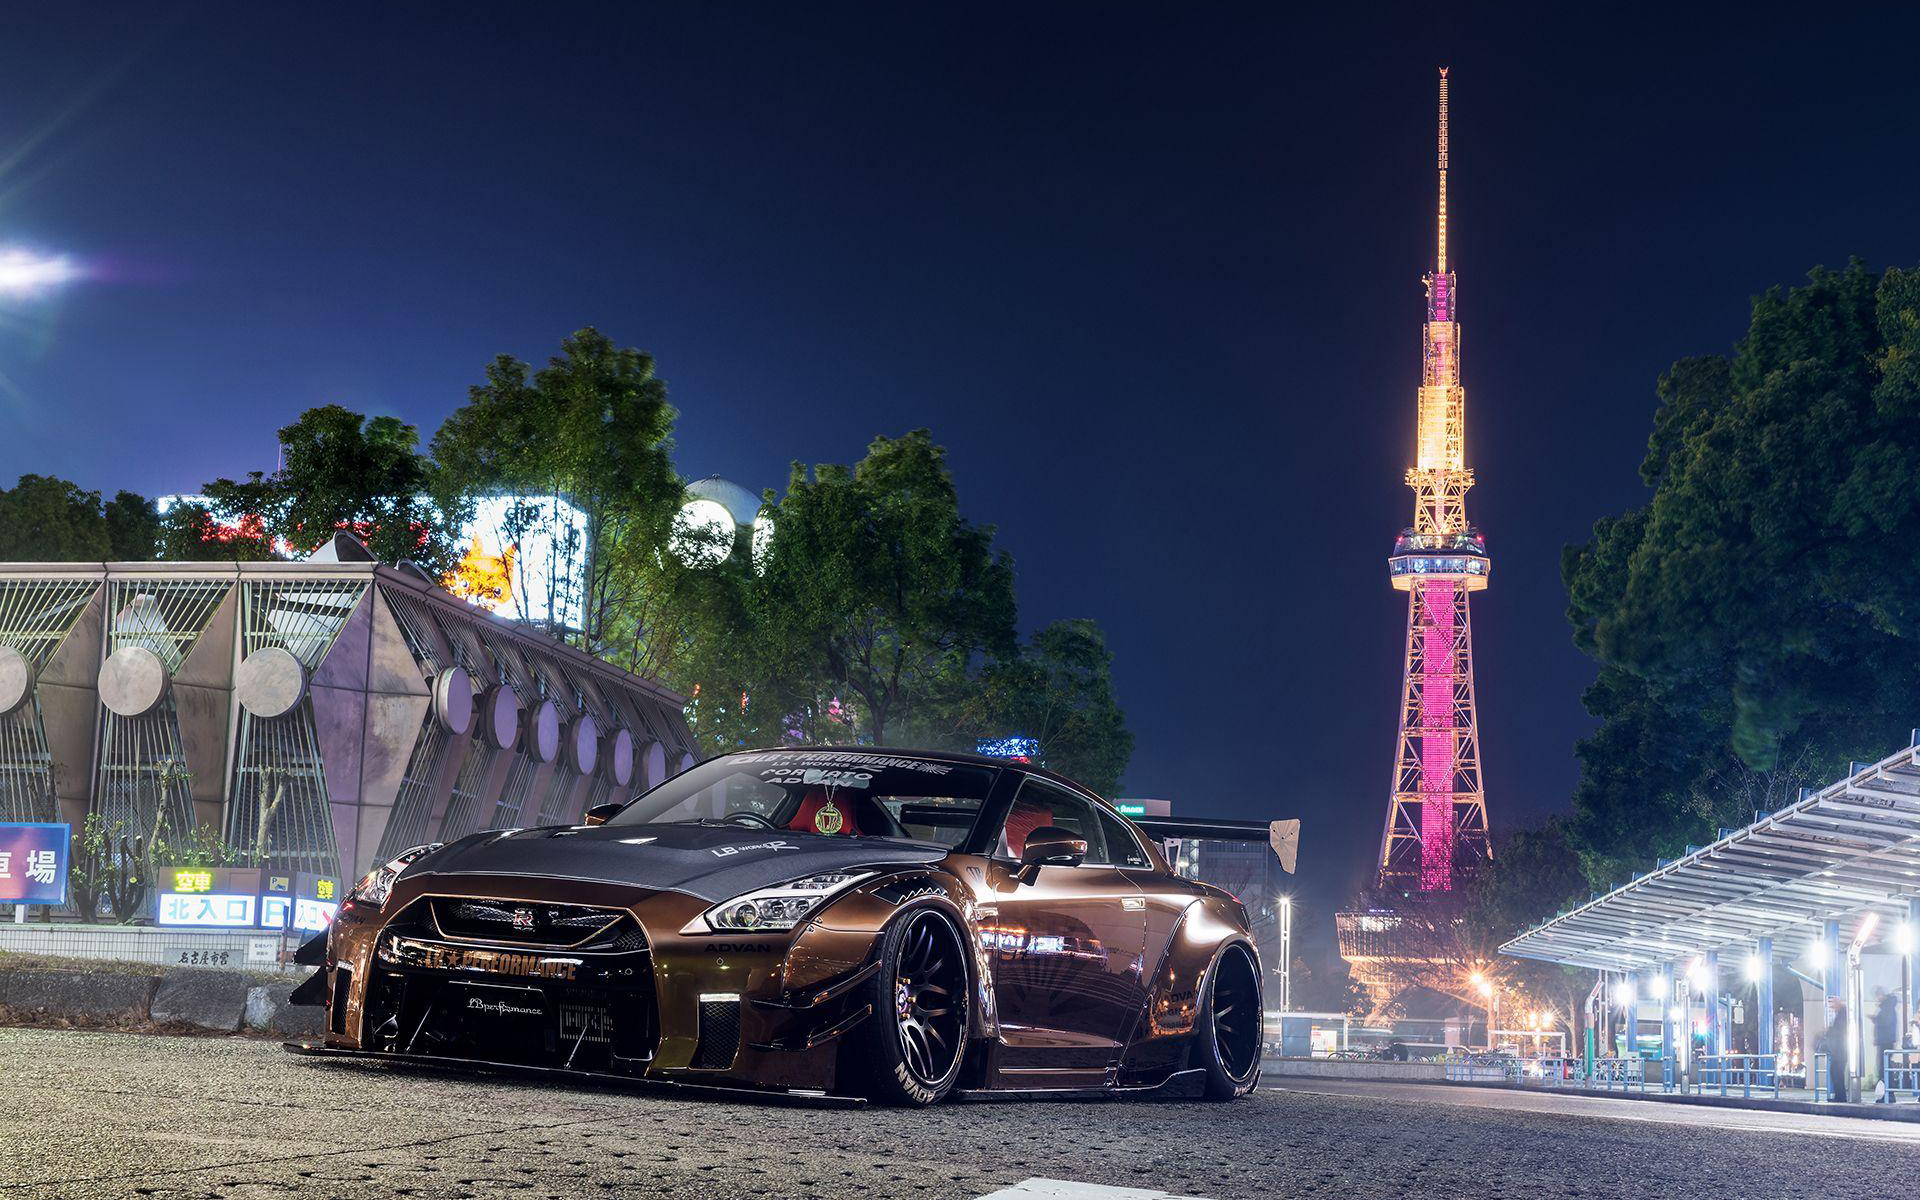 Download Wallpaper Liberty Walk, Tuning, Nissan GT R, Tokyo, 2018 Cars, Forgiato Wheels, Maglia ECL, R Tunned GT R, Nissan For Desktop With Resolution 1920x1200. High Quality HD Picture Wallpaper